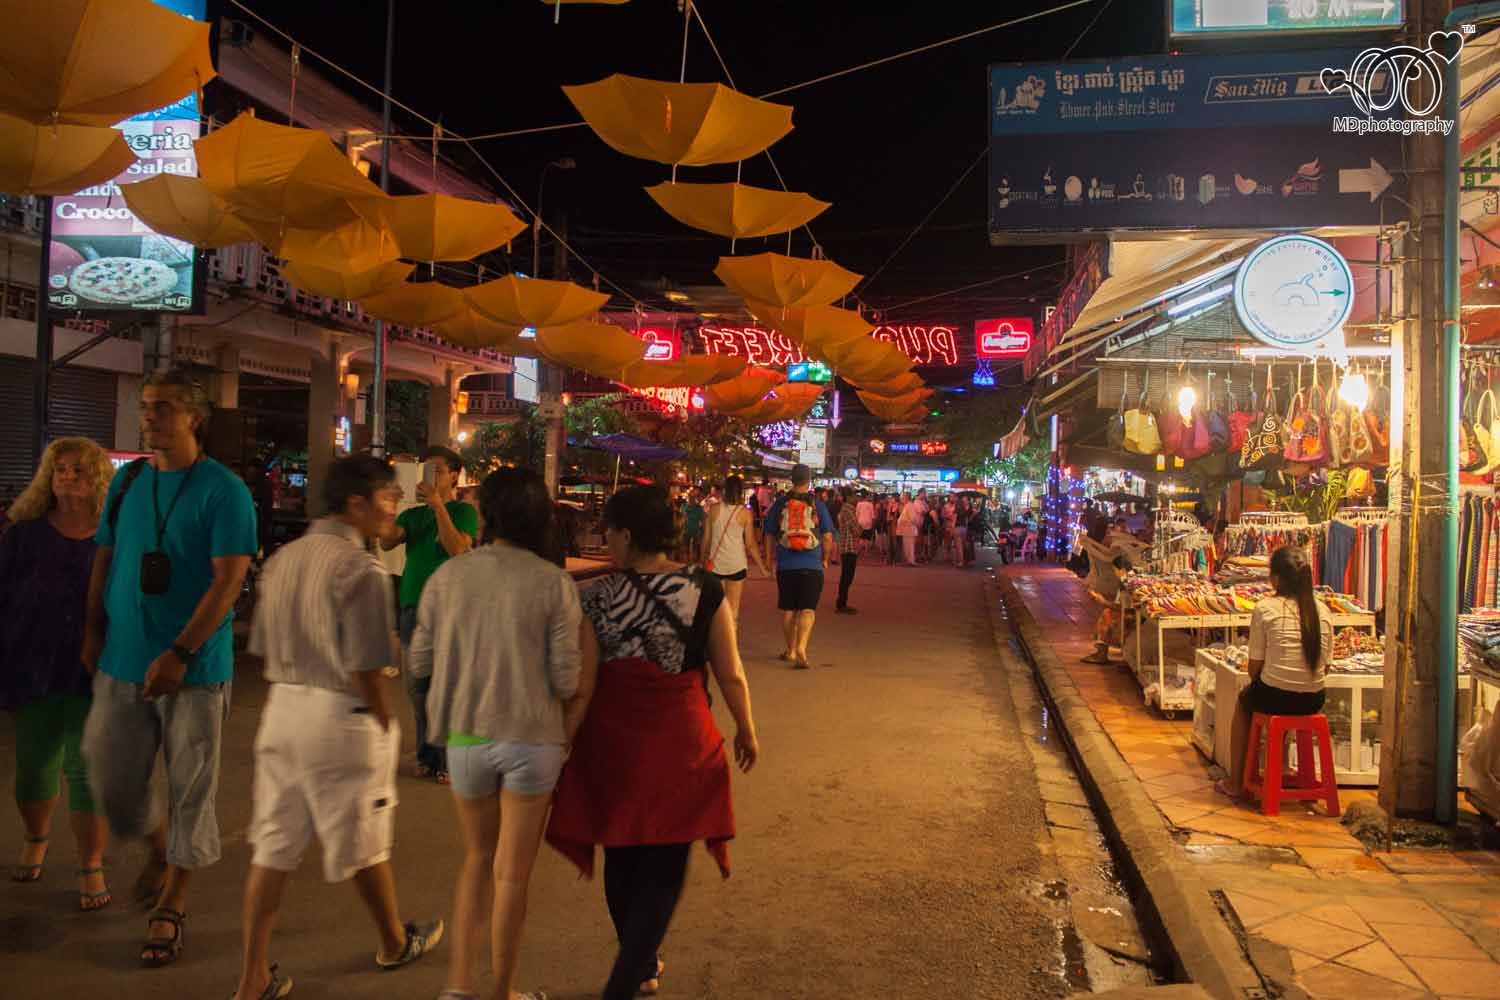 Colorful lights and crowds of people on Pub Street, a popular nightlife destination in Siem Reap.